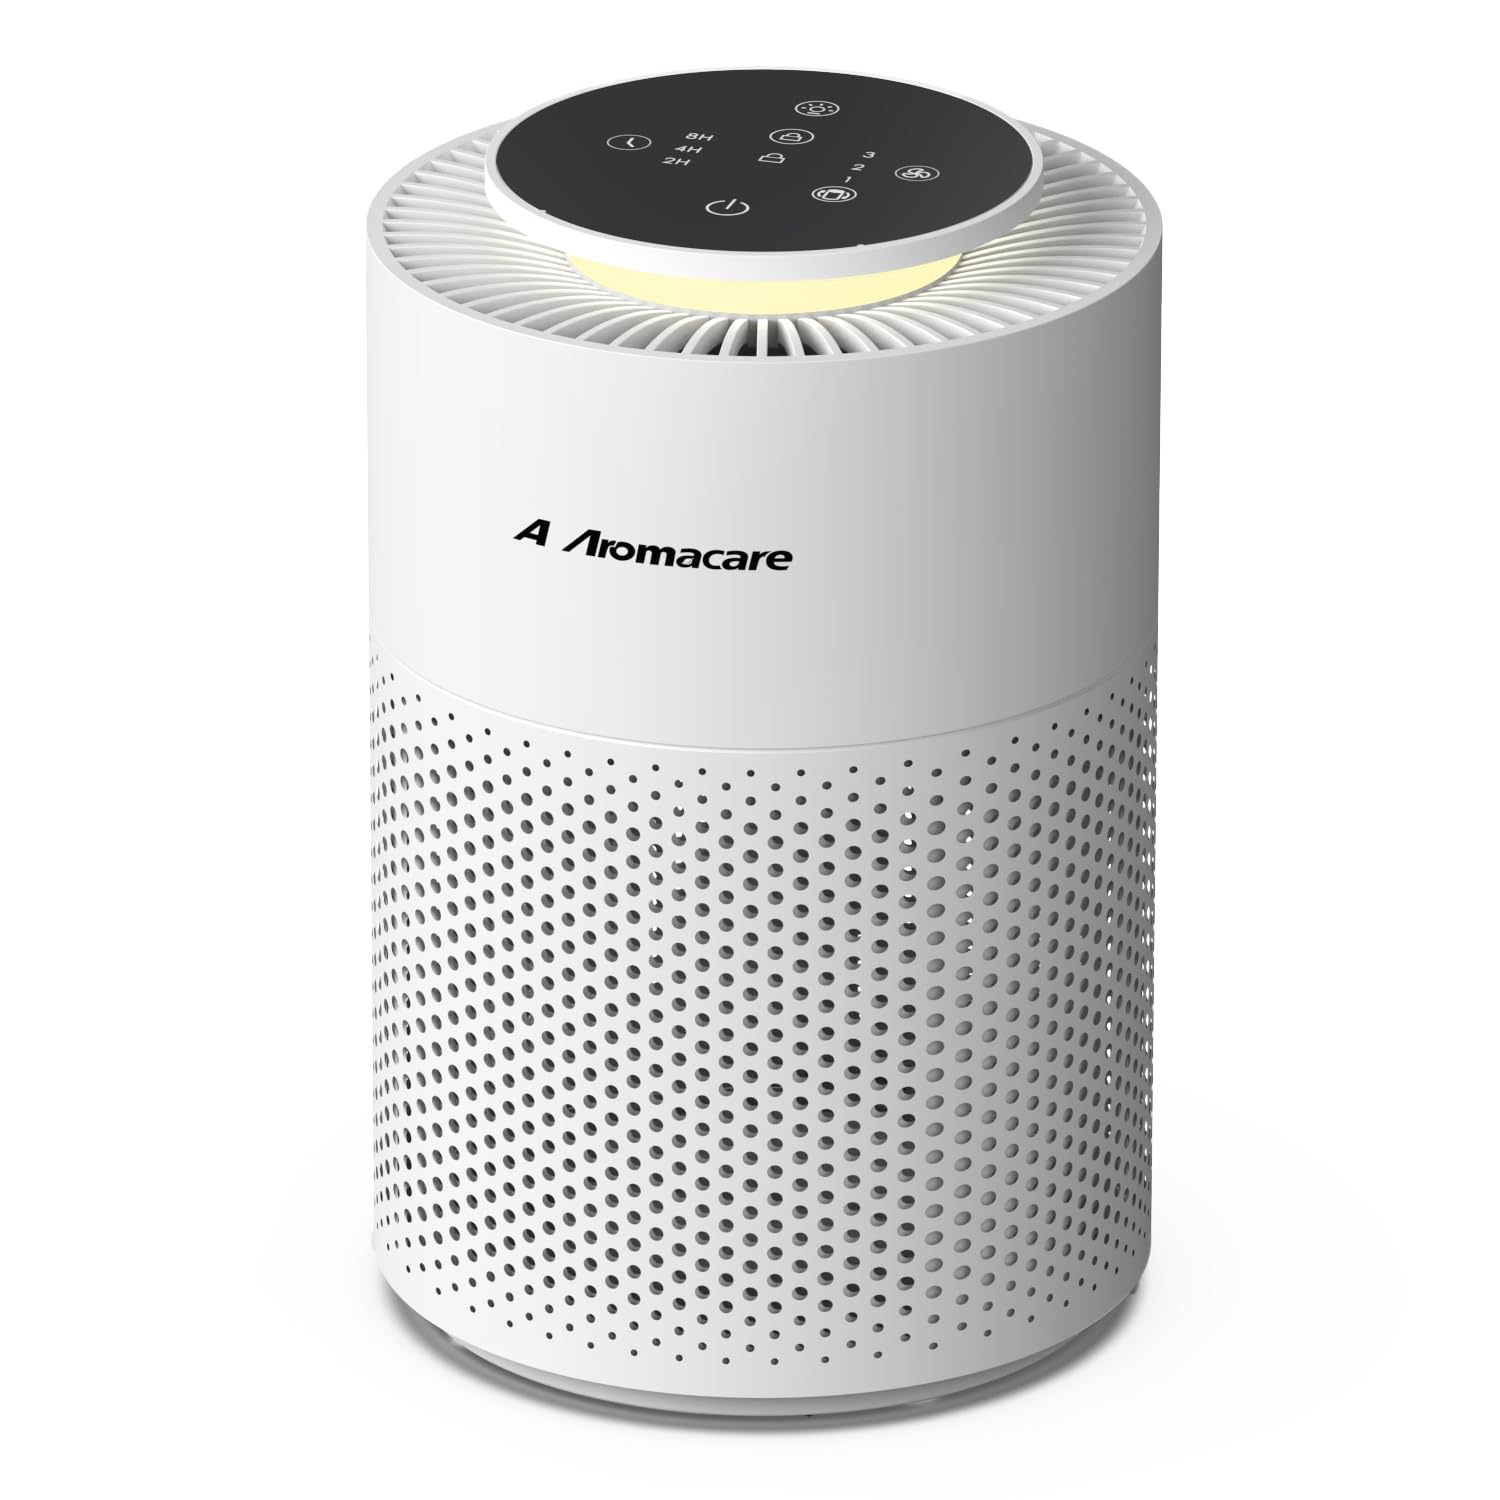 

Air Purifiers For Bedroom Home, True Hepa Filter Cleaner With Timer, Night Light, Safety Lock, Effectively Clean 99.93 Hair, Smoke, Dust, Pet Dander, Odors, Desktop, Portable, White